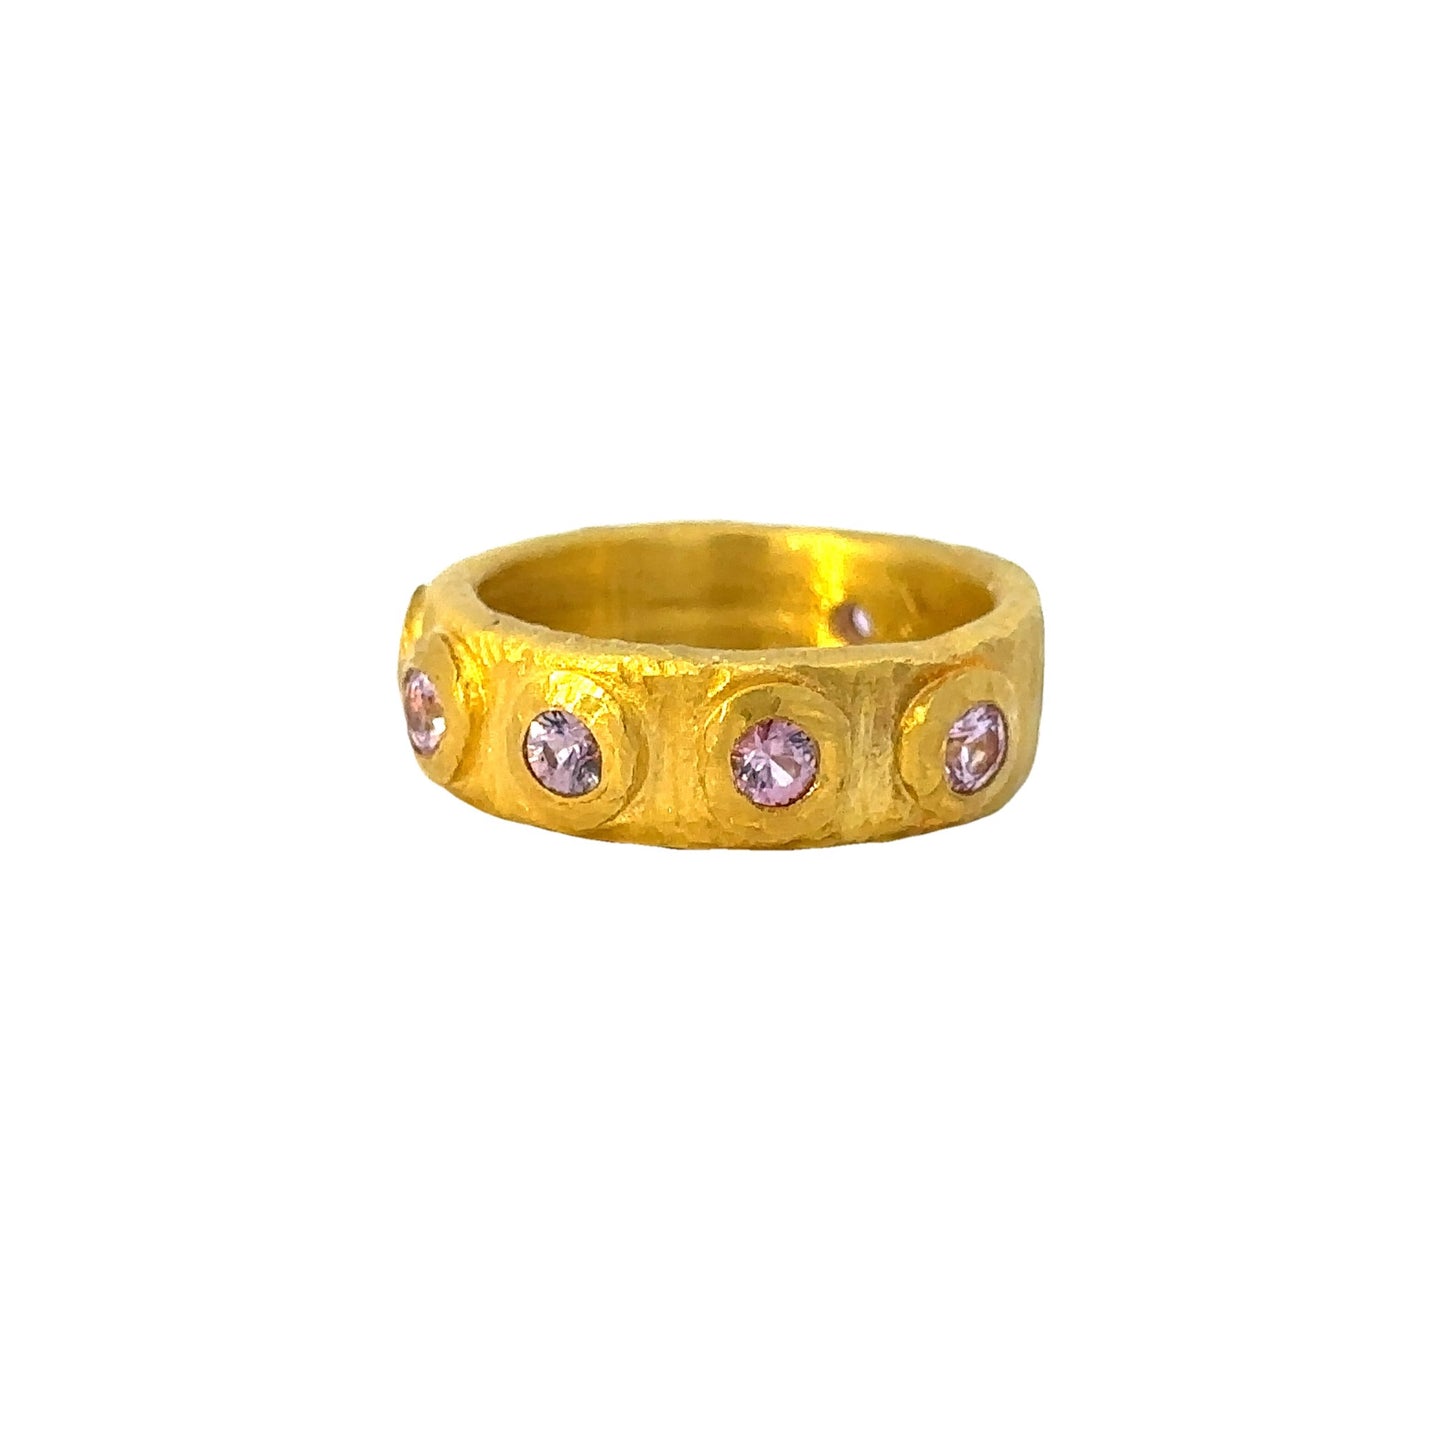 kai - one of a kind ring - pink sapphire